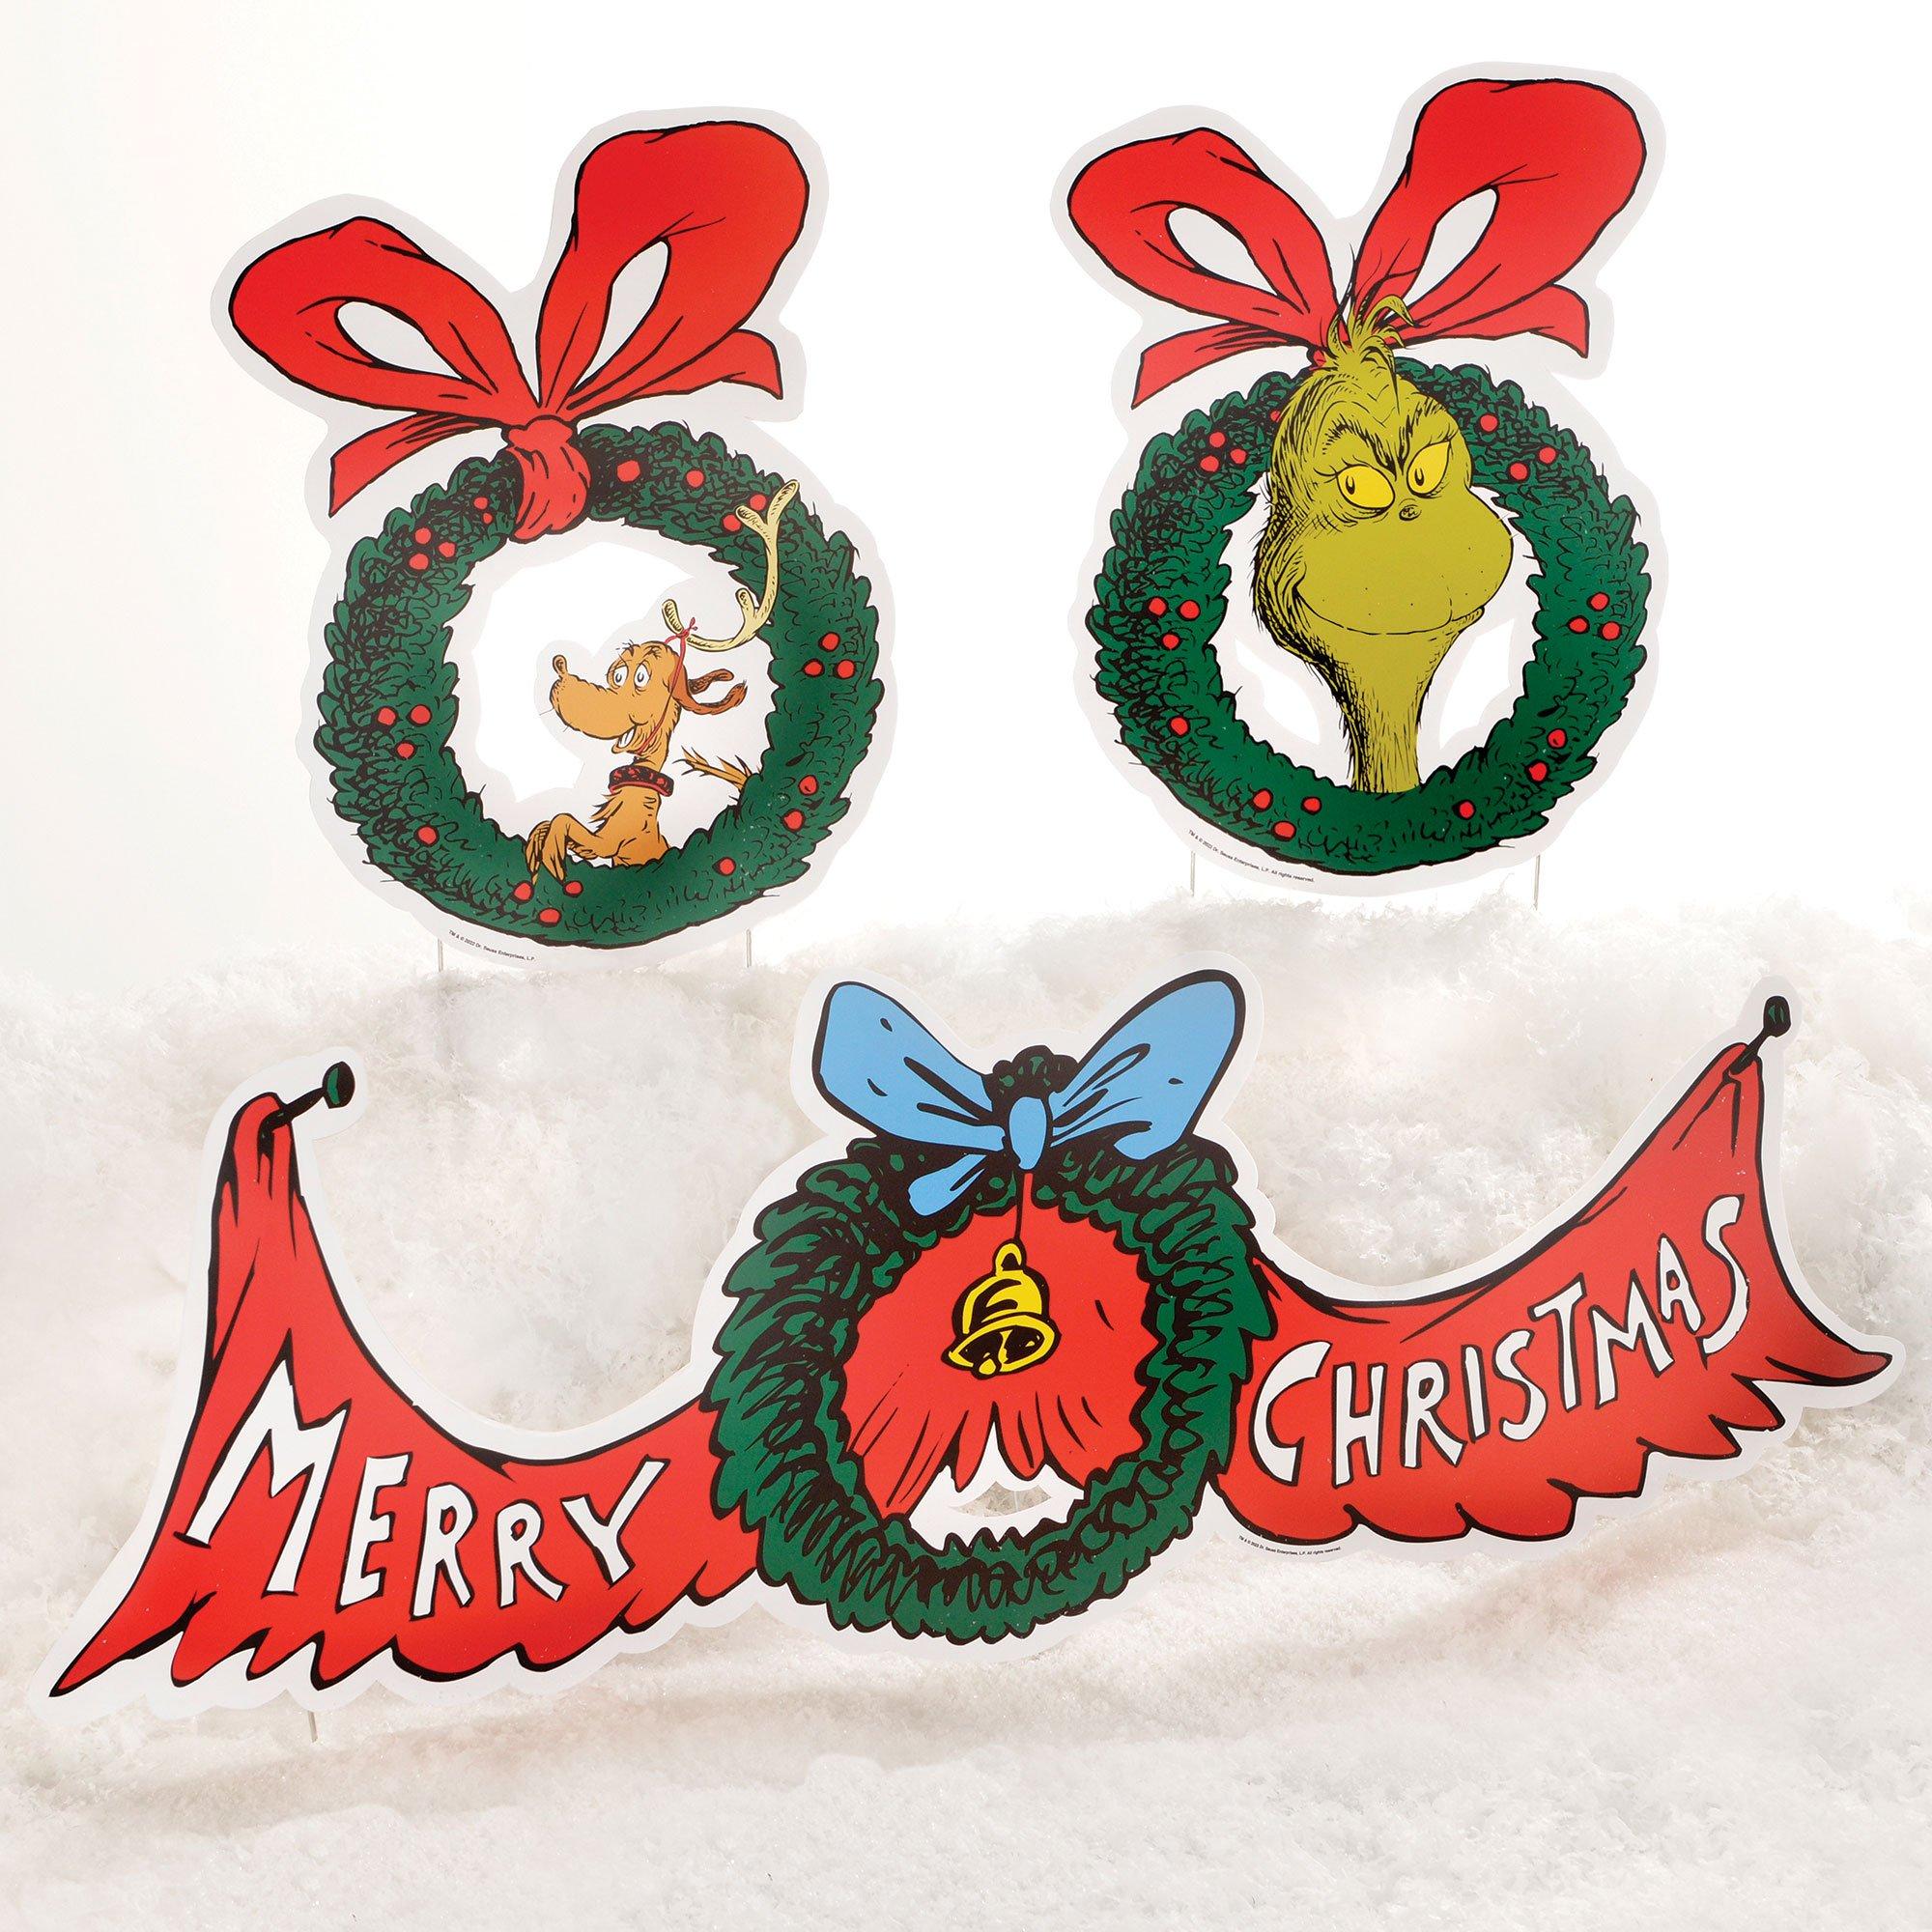 Grinch Merry Christmas Corrugated Plastic Yard Sign Set, 3pc - Dr. Seuss